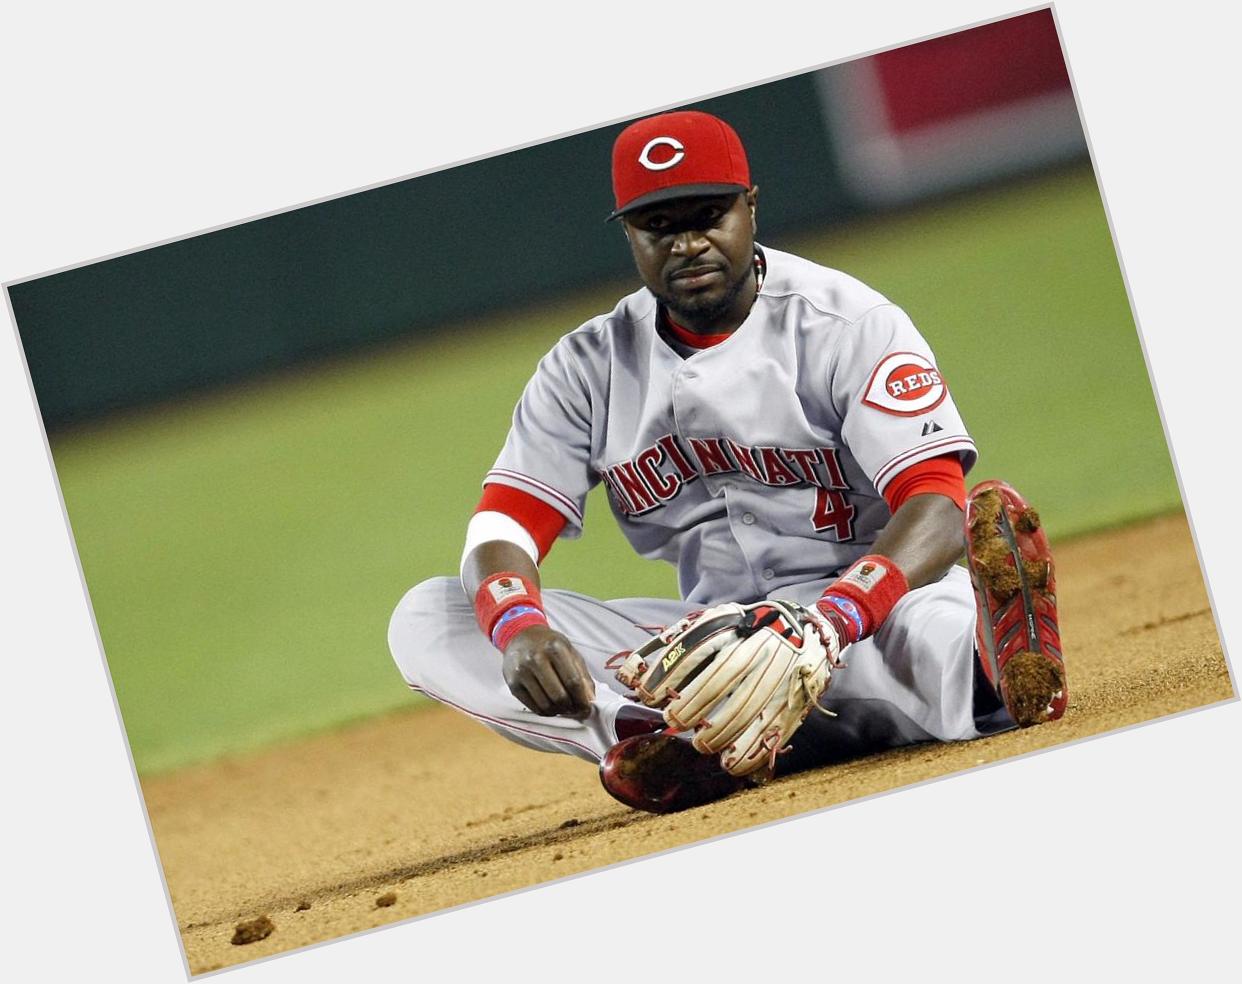 As you continue to watch the full day of baseball,

REmessage to wish Brandon Phillips a happy birthday! 